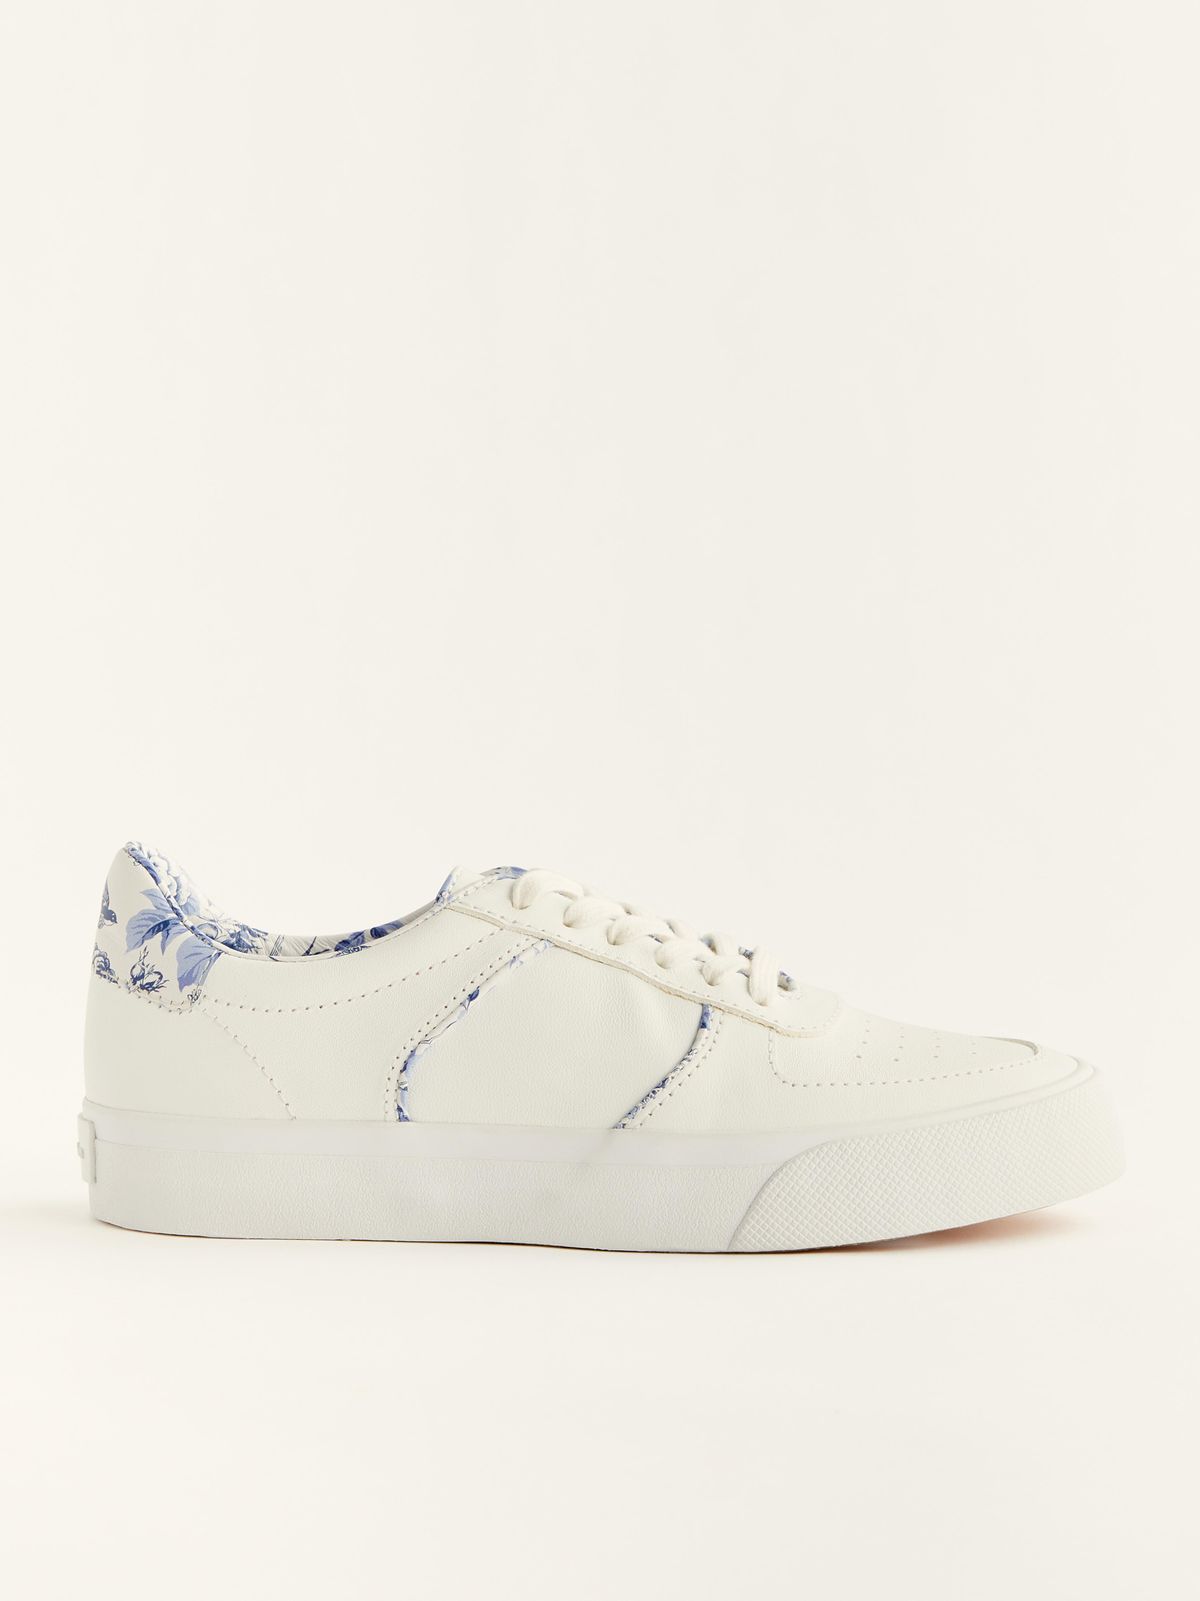 Harlow Leather Sneaker in White / Pompadour